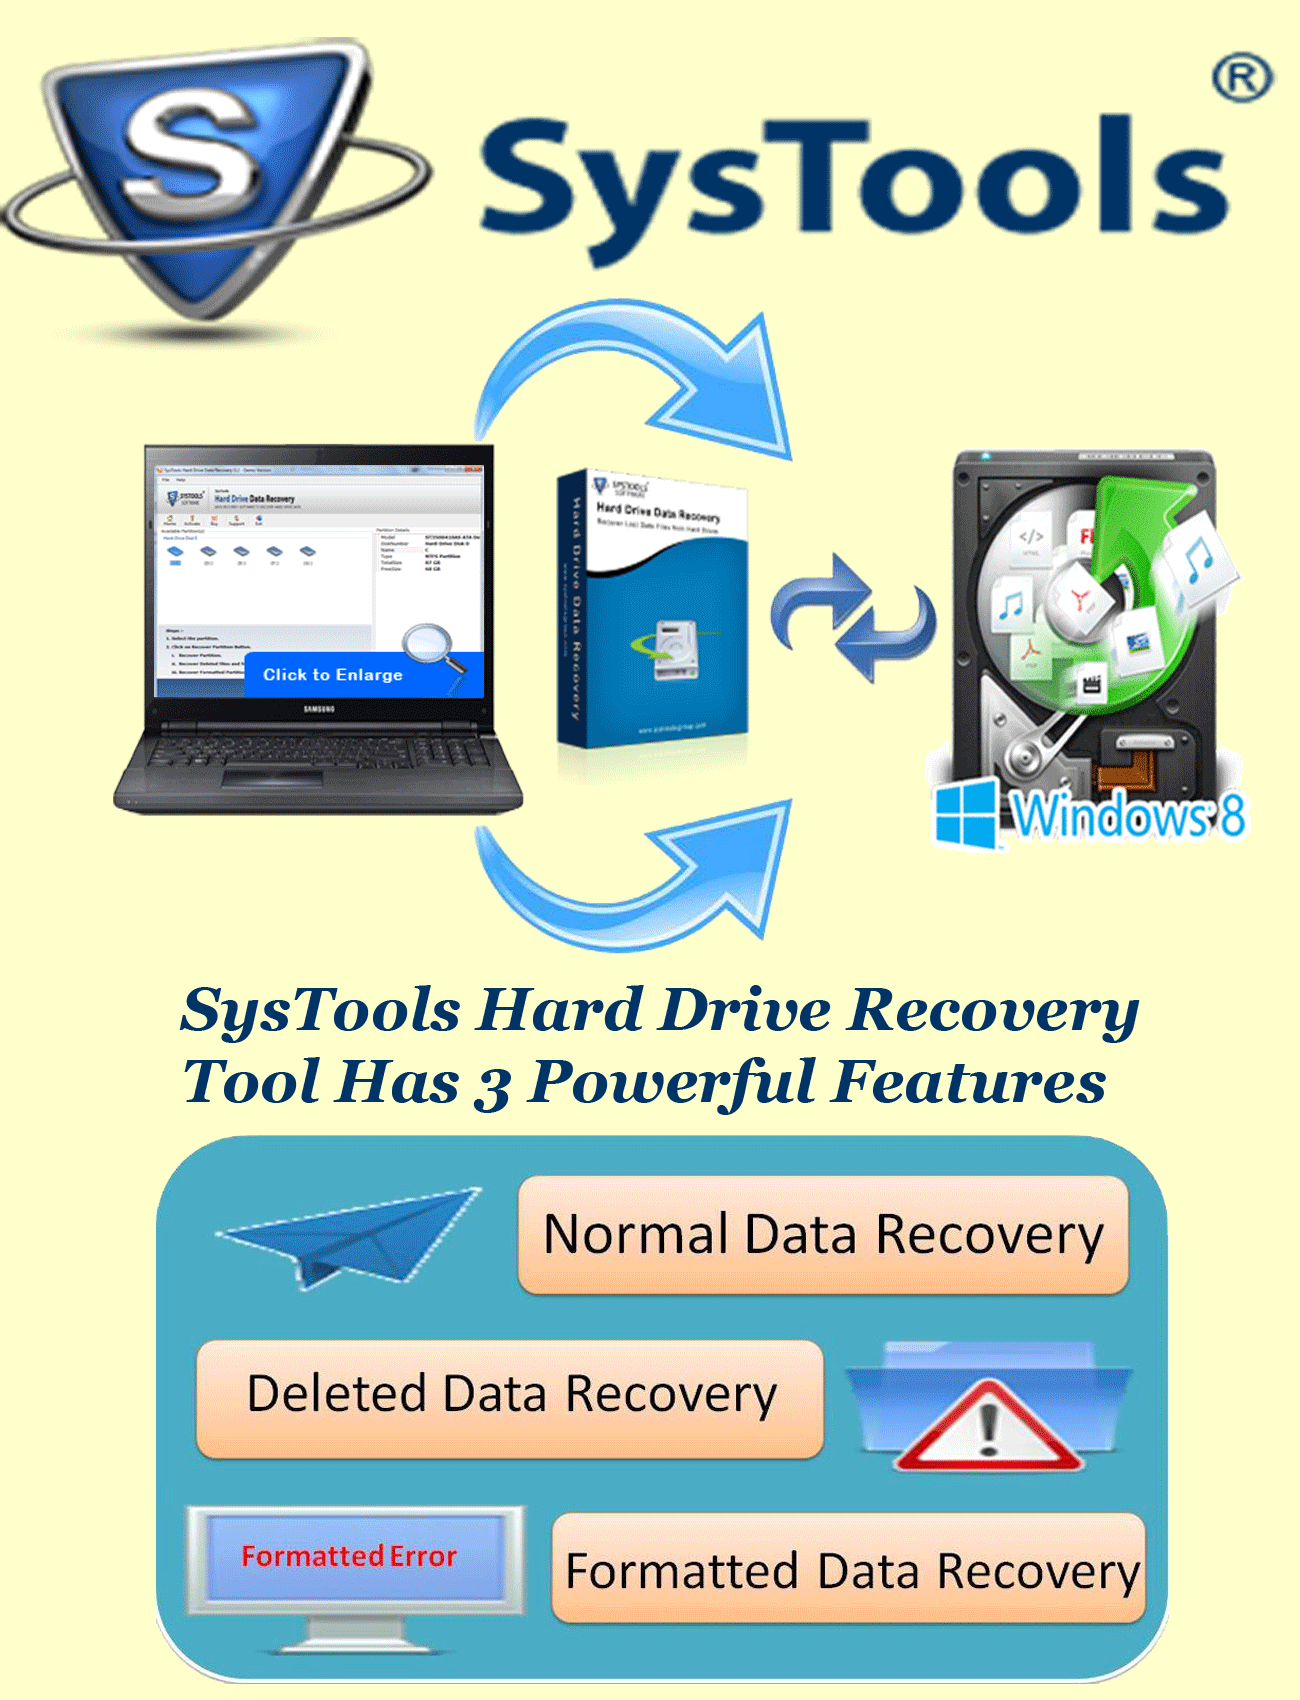 SysTools Hard Drive Recovery Infographic